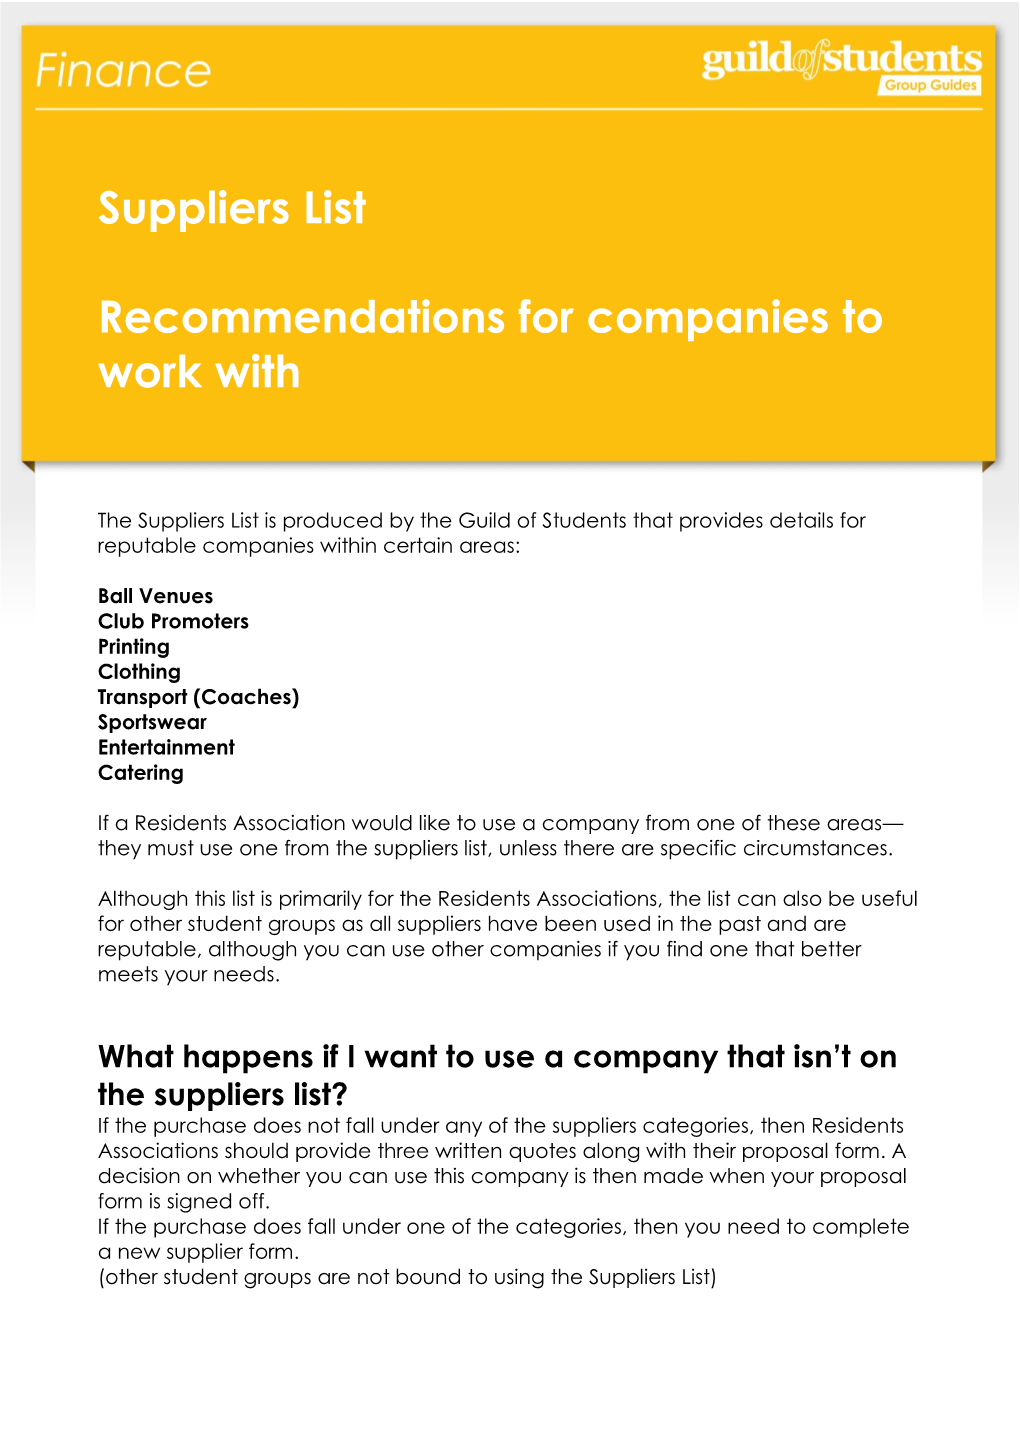 Suppliers List Recommendations for Companies to Work With